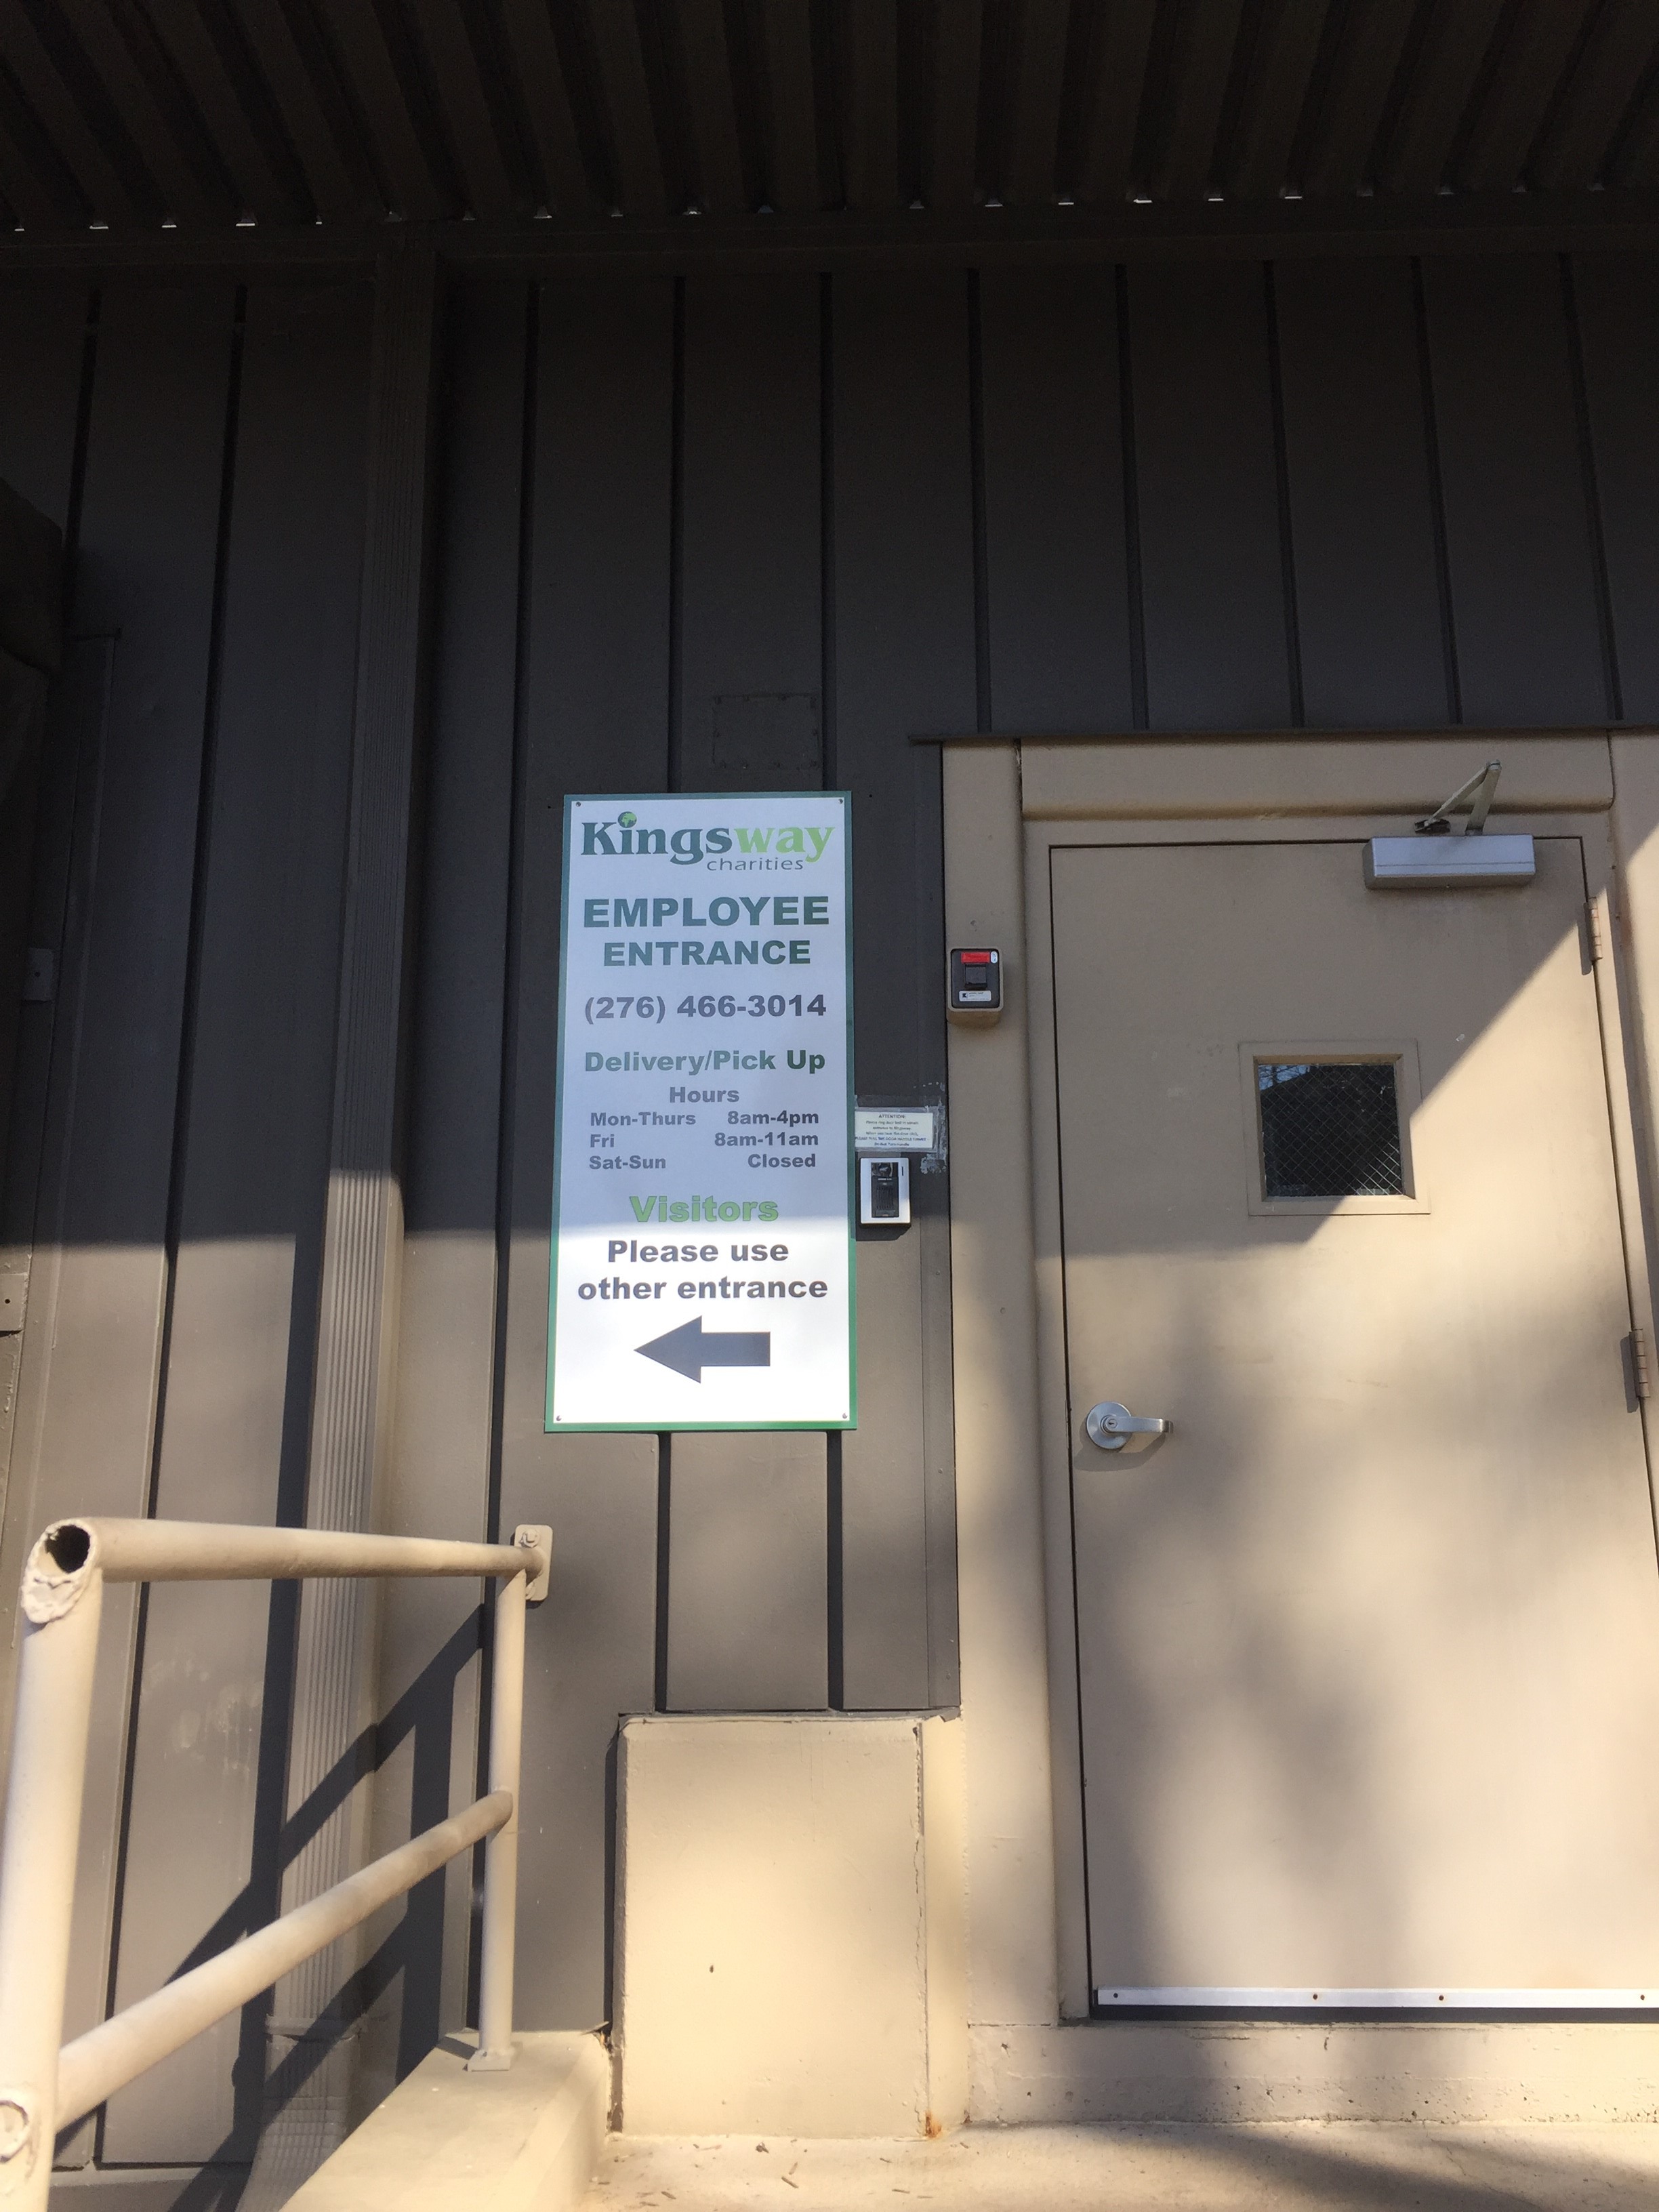 Kingsway Charities employee entrance sign with operating hours